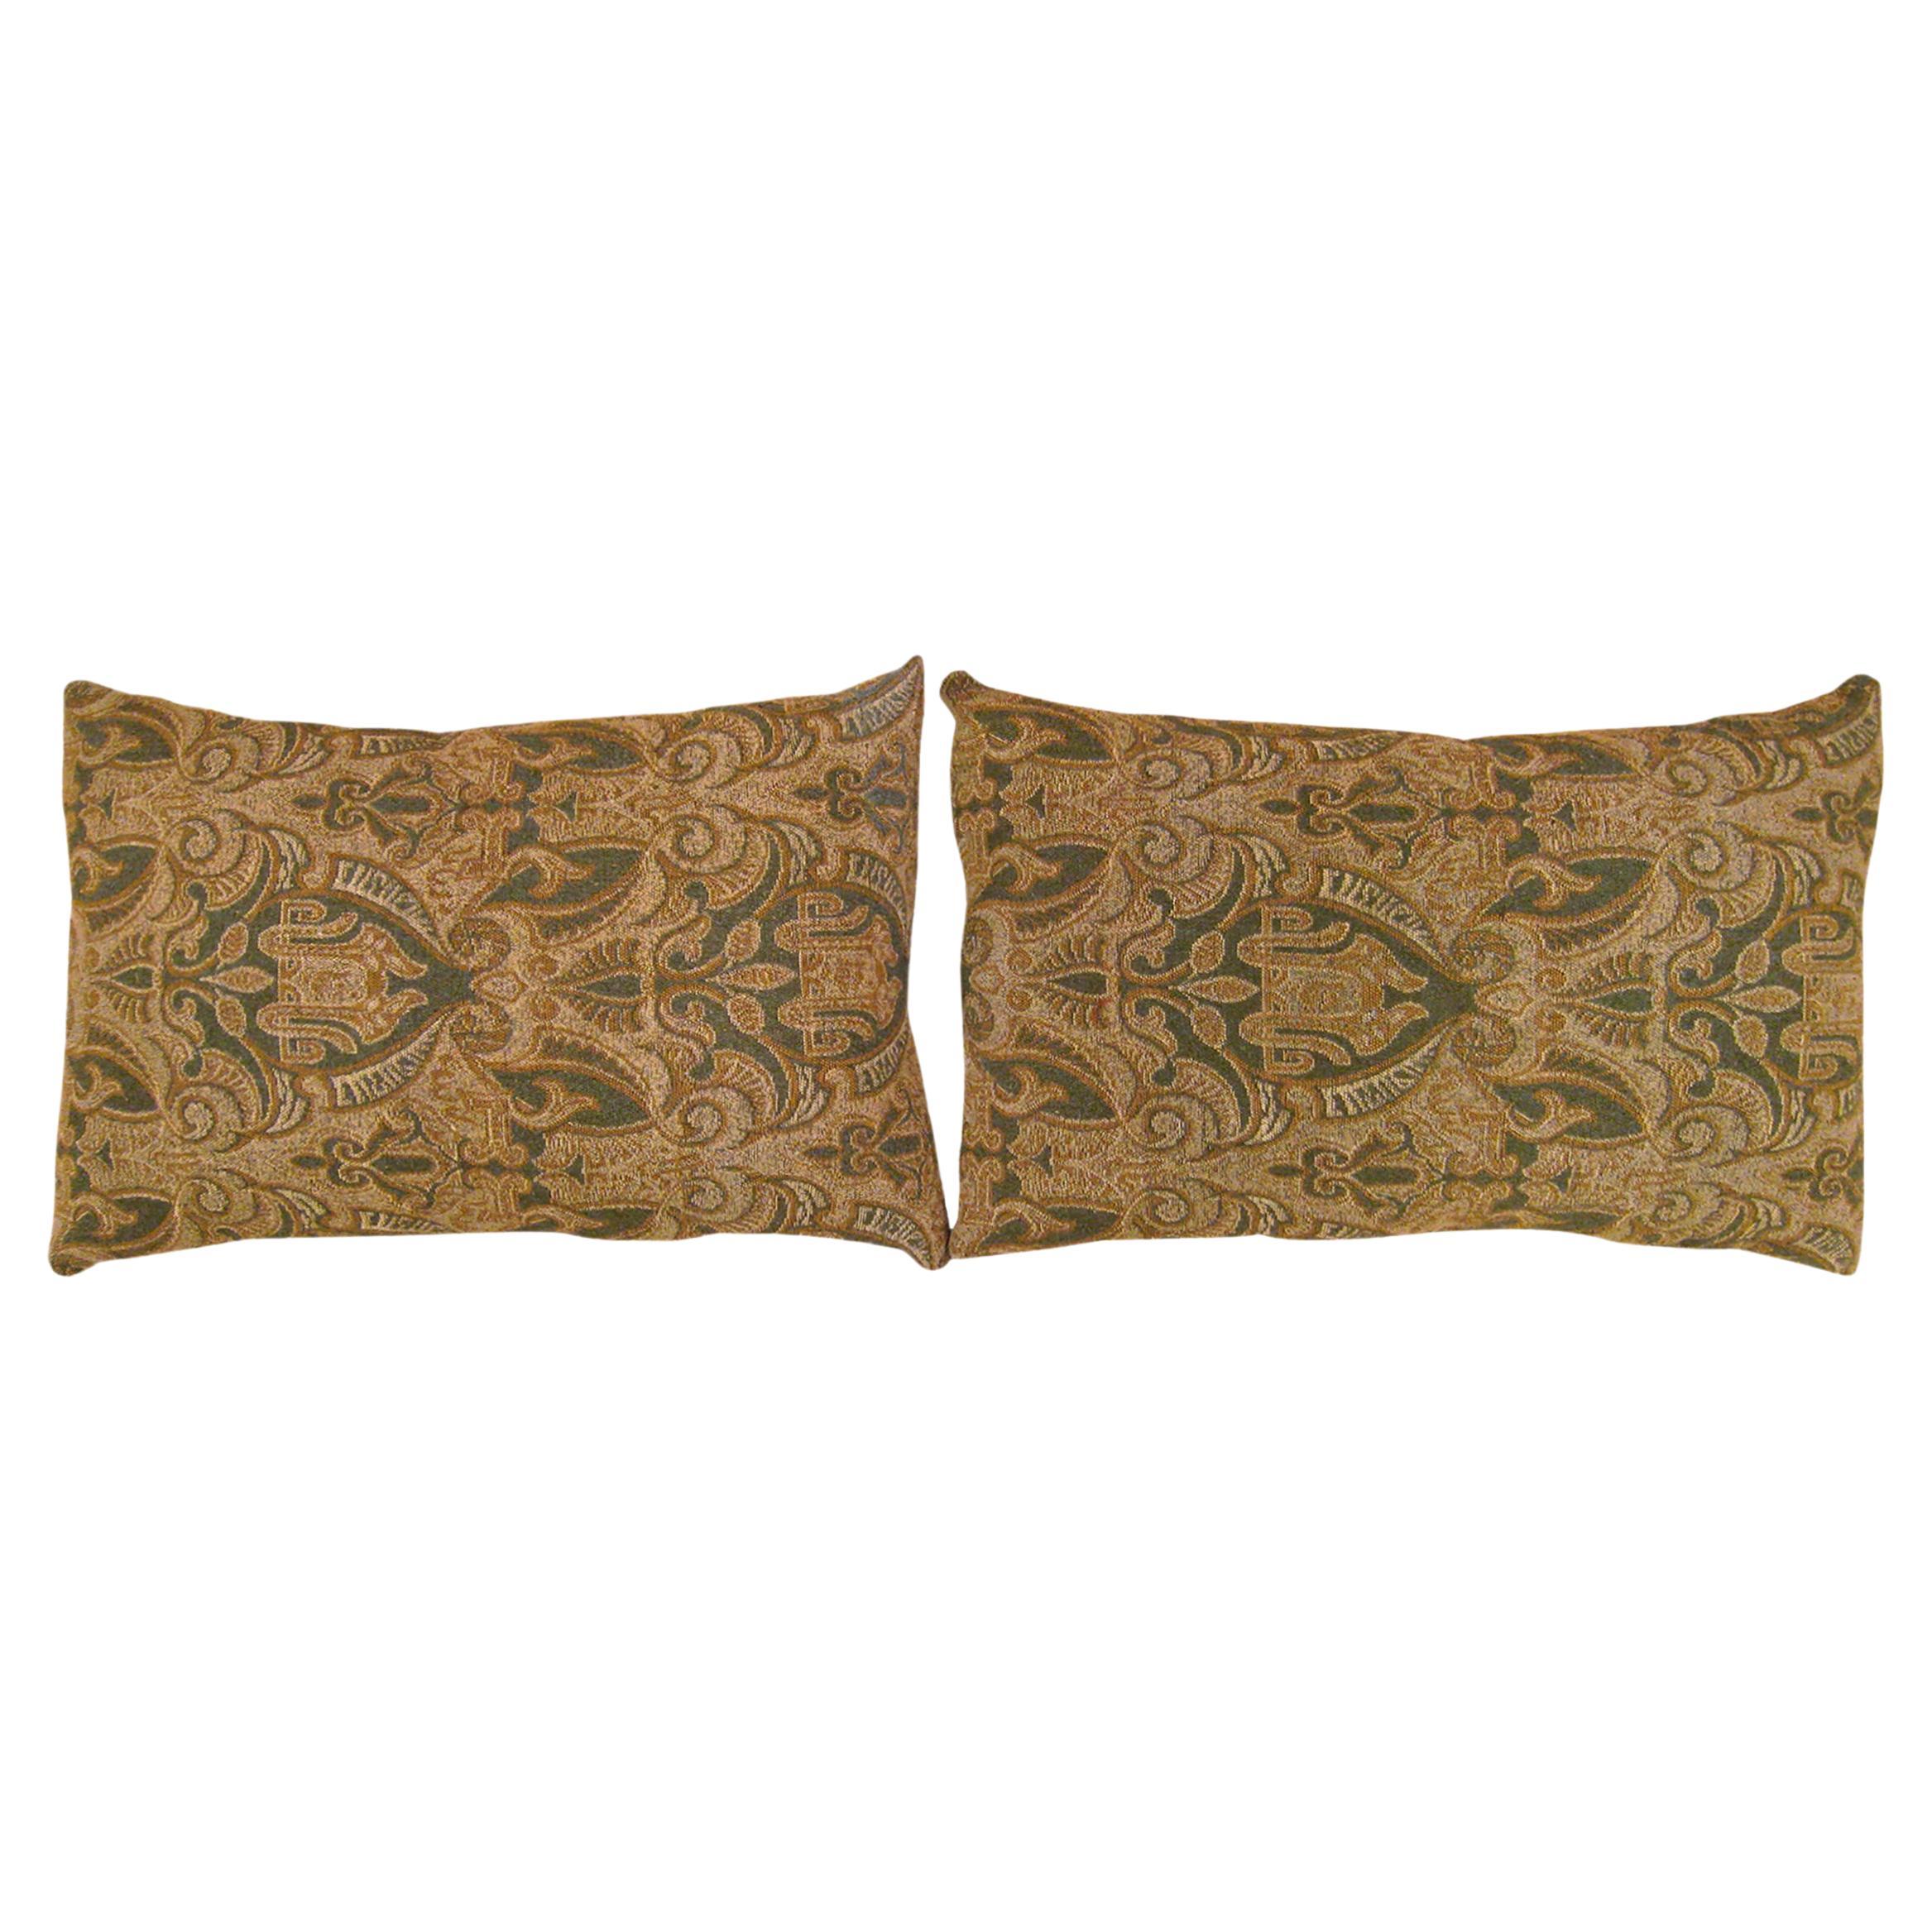 Pair of Decorative Antique Jacquard Tapestry Pillows with Geometric Abstracts 